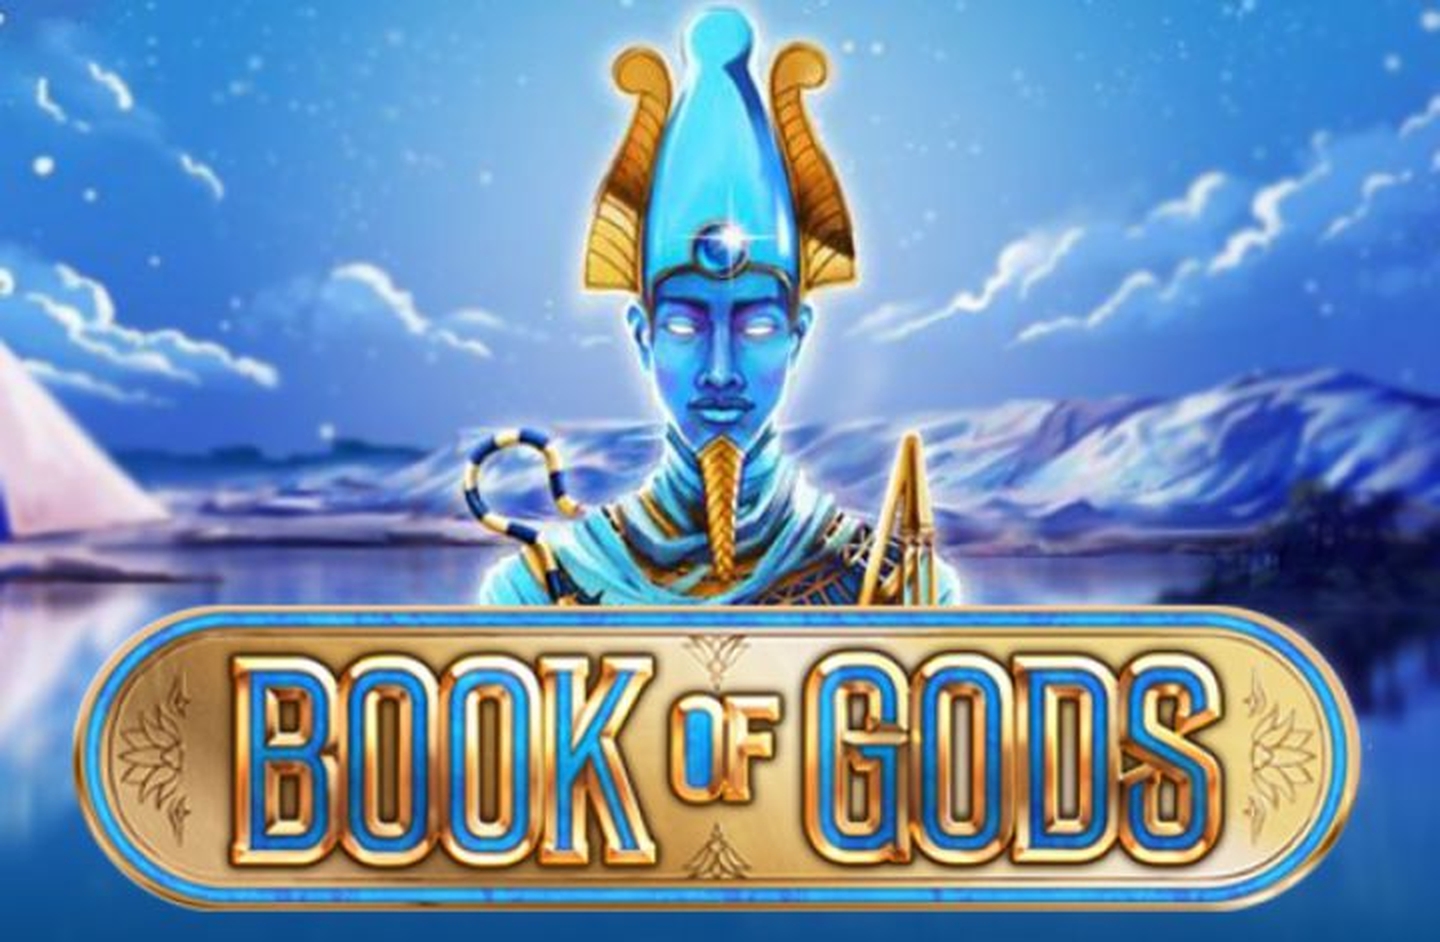 The Book of Gods Online Slot Demo Game by Big Time Gaming